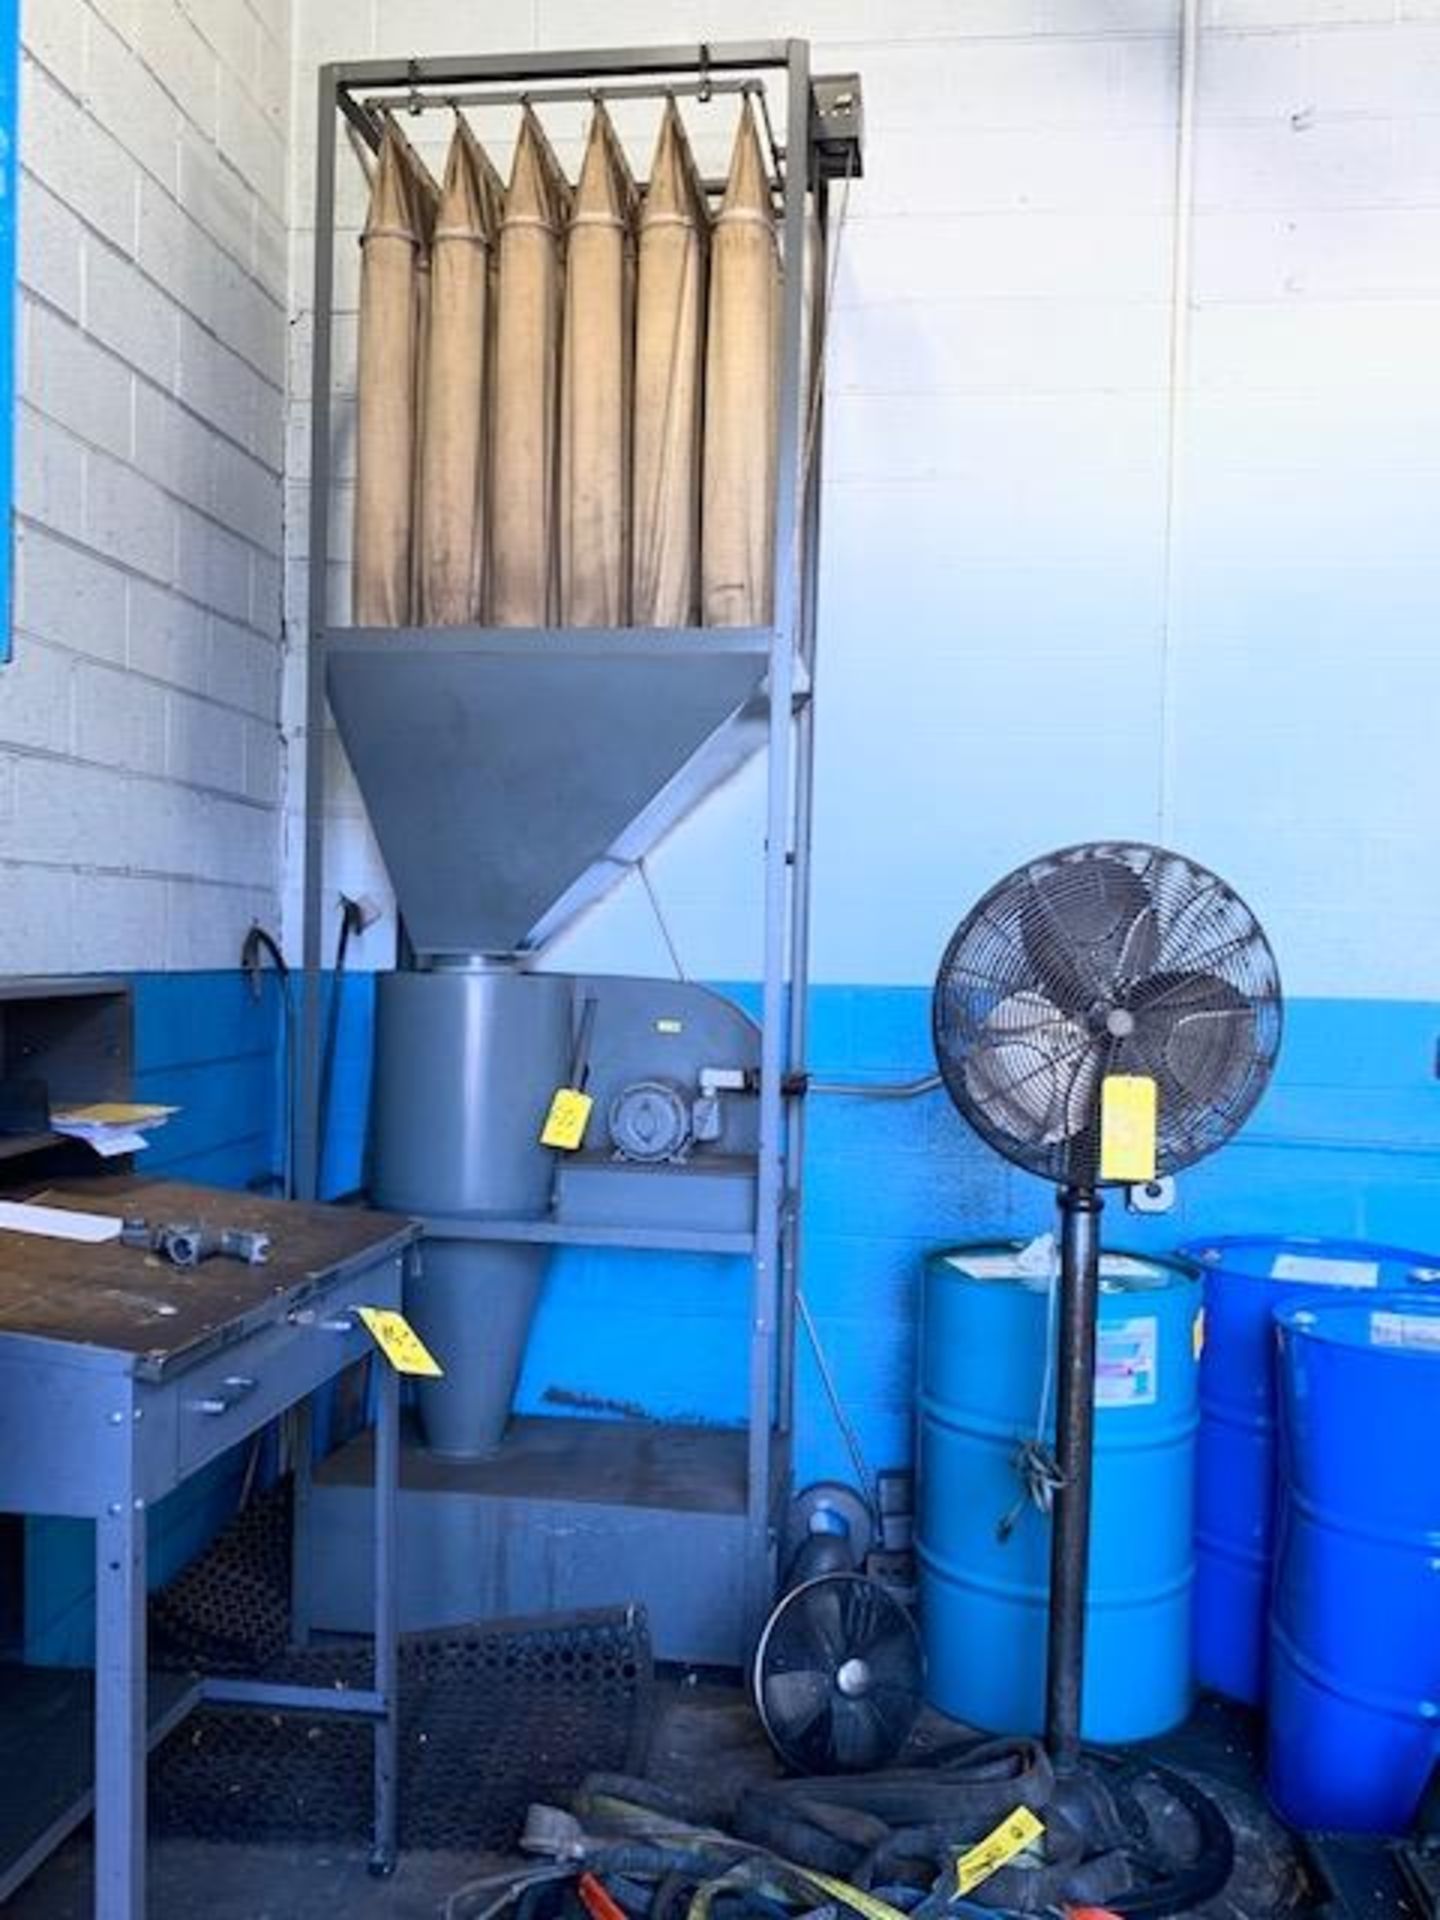 AGET 20T31-SP DUST COLLECTOR WITH 24 FILTER BAGS AND BLOWER